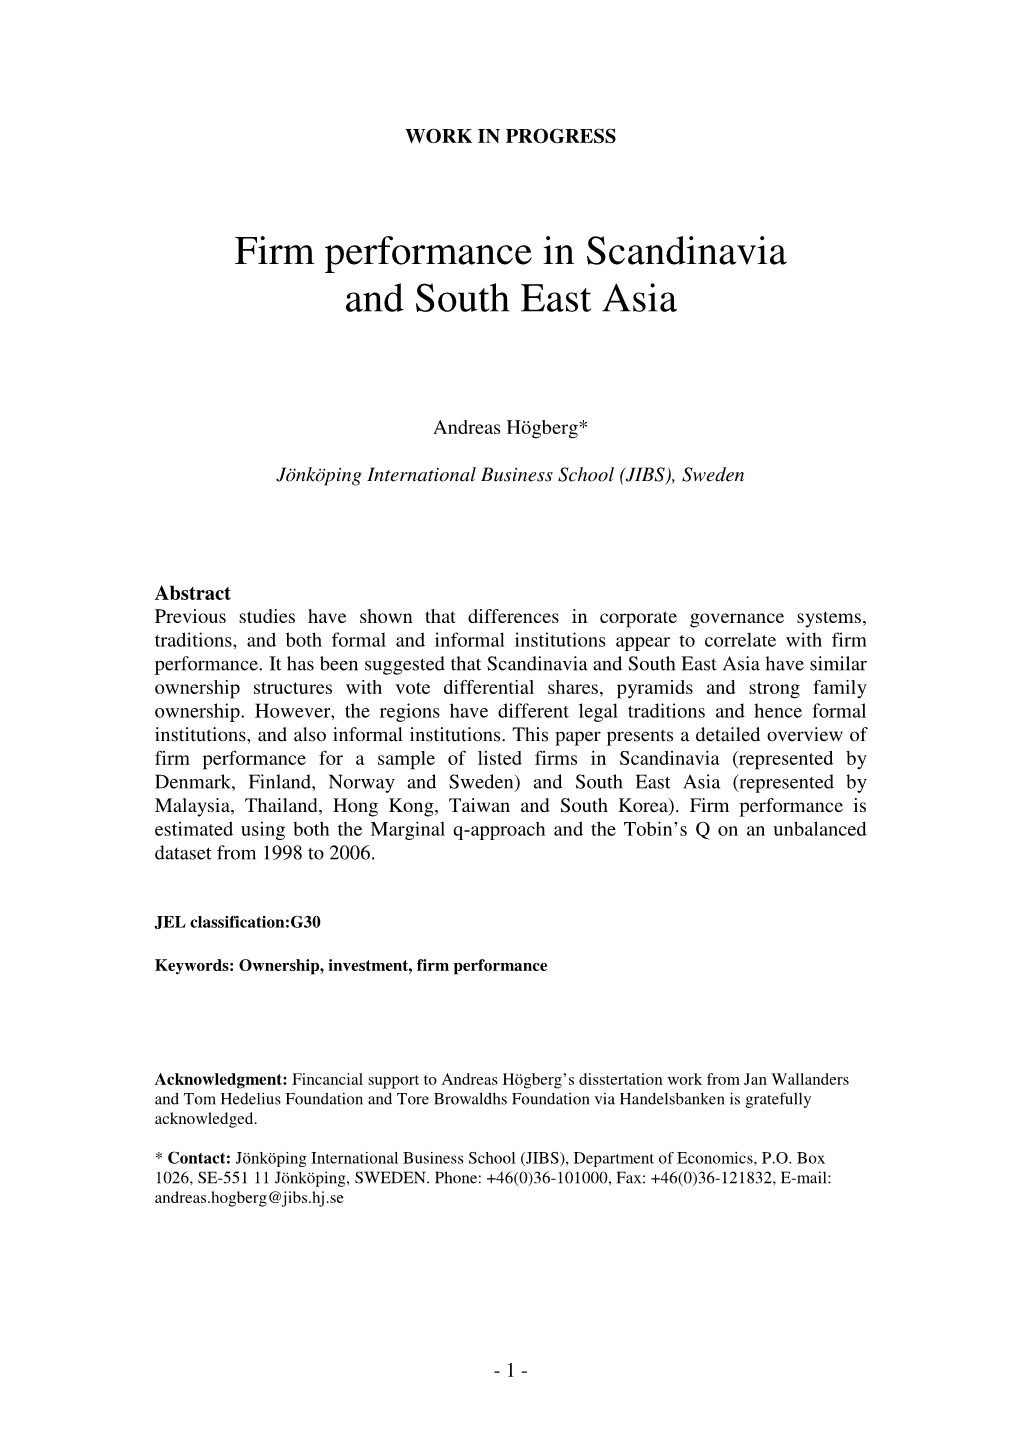 Firm Performance in Scandinavia and South East Asia